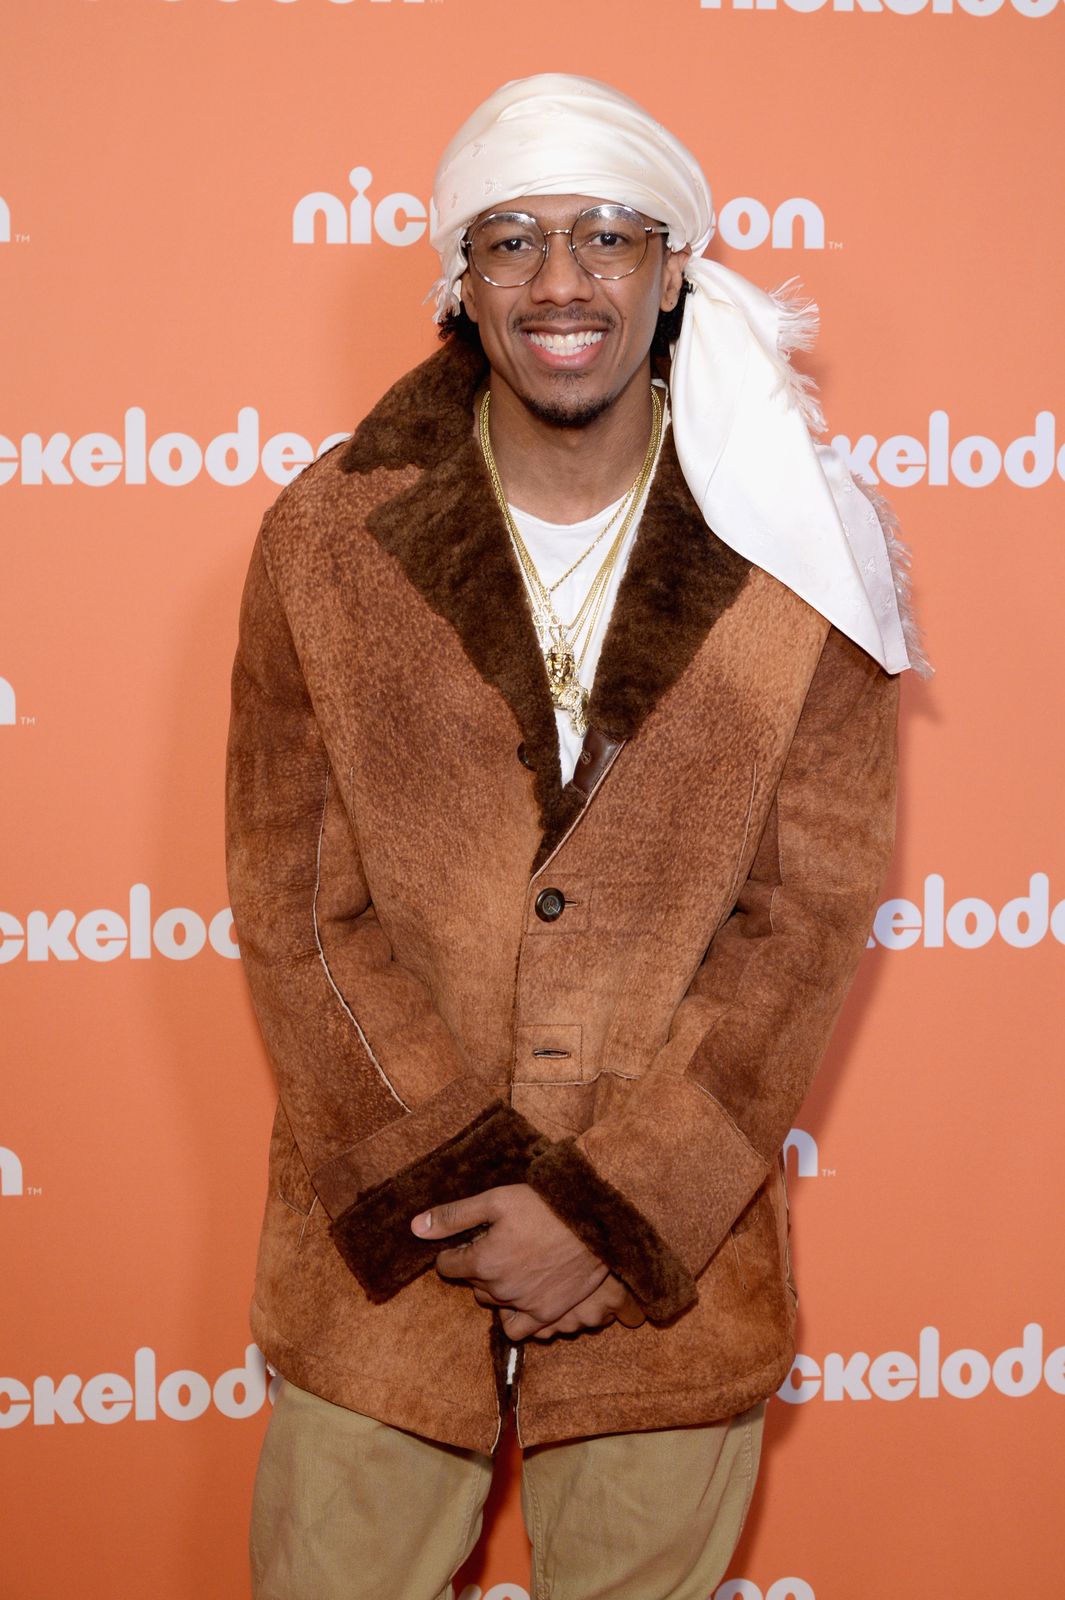 Nick Cannon attends the Nickelodeon Upfront 2018 at Palace Theatre on March 6, 2018 in New York City. | Photo: Getty Images